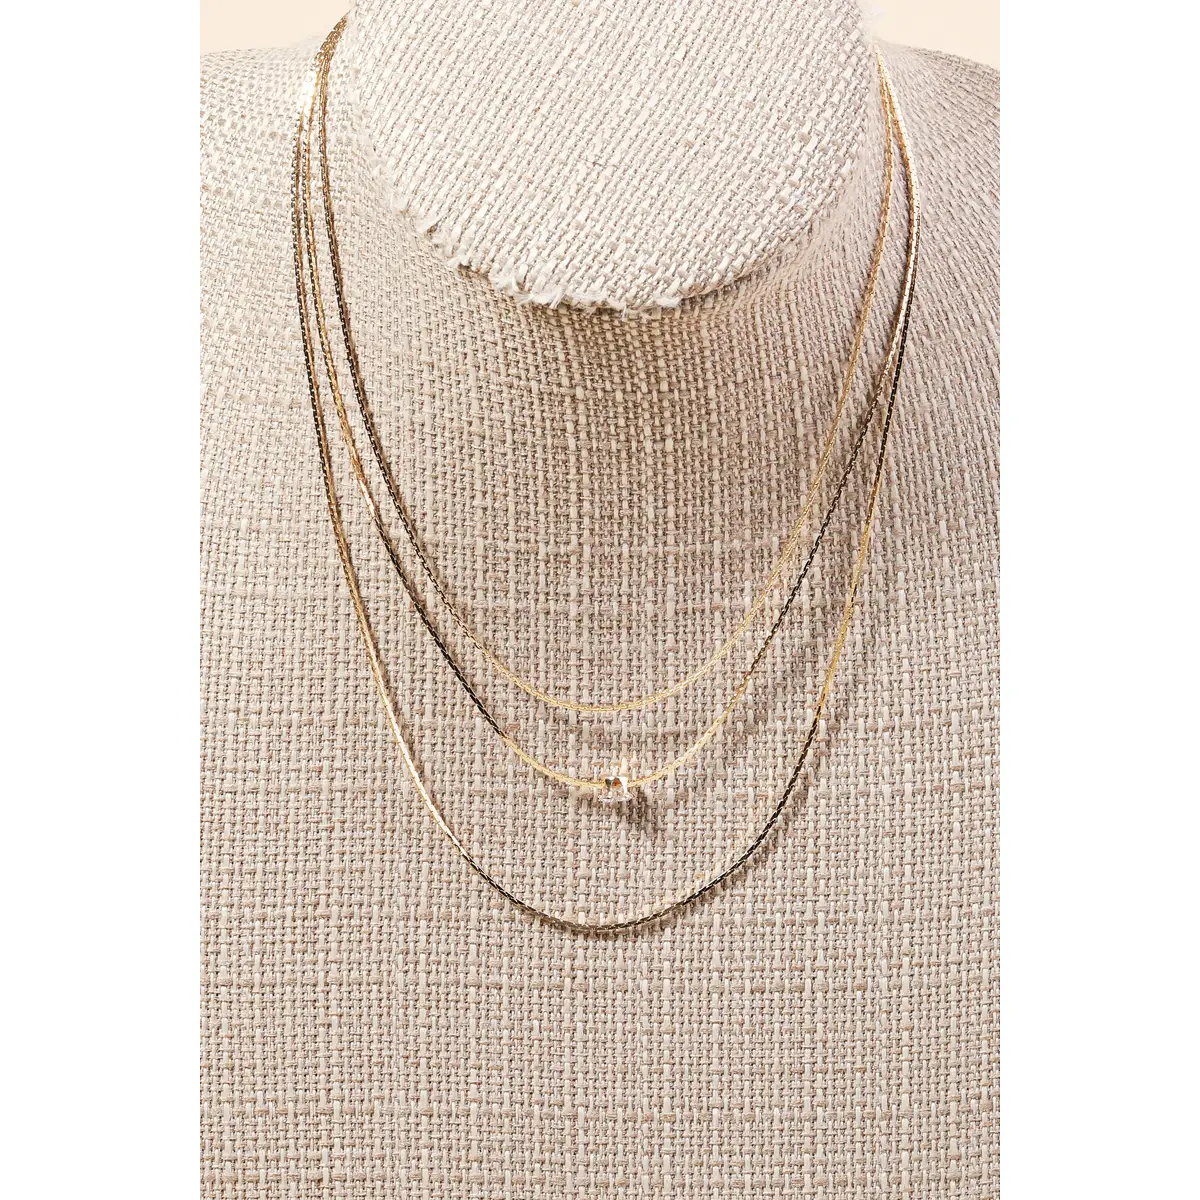 Triple Layered Chain Necklace - GOLD